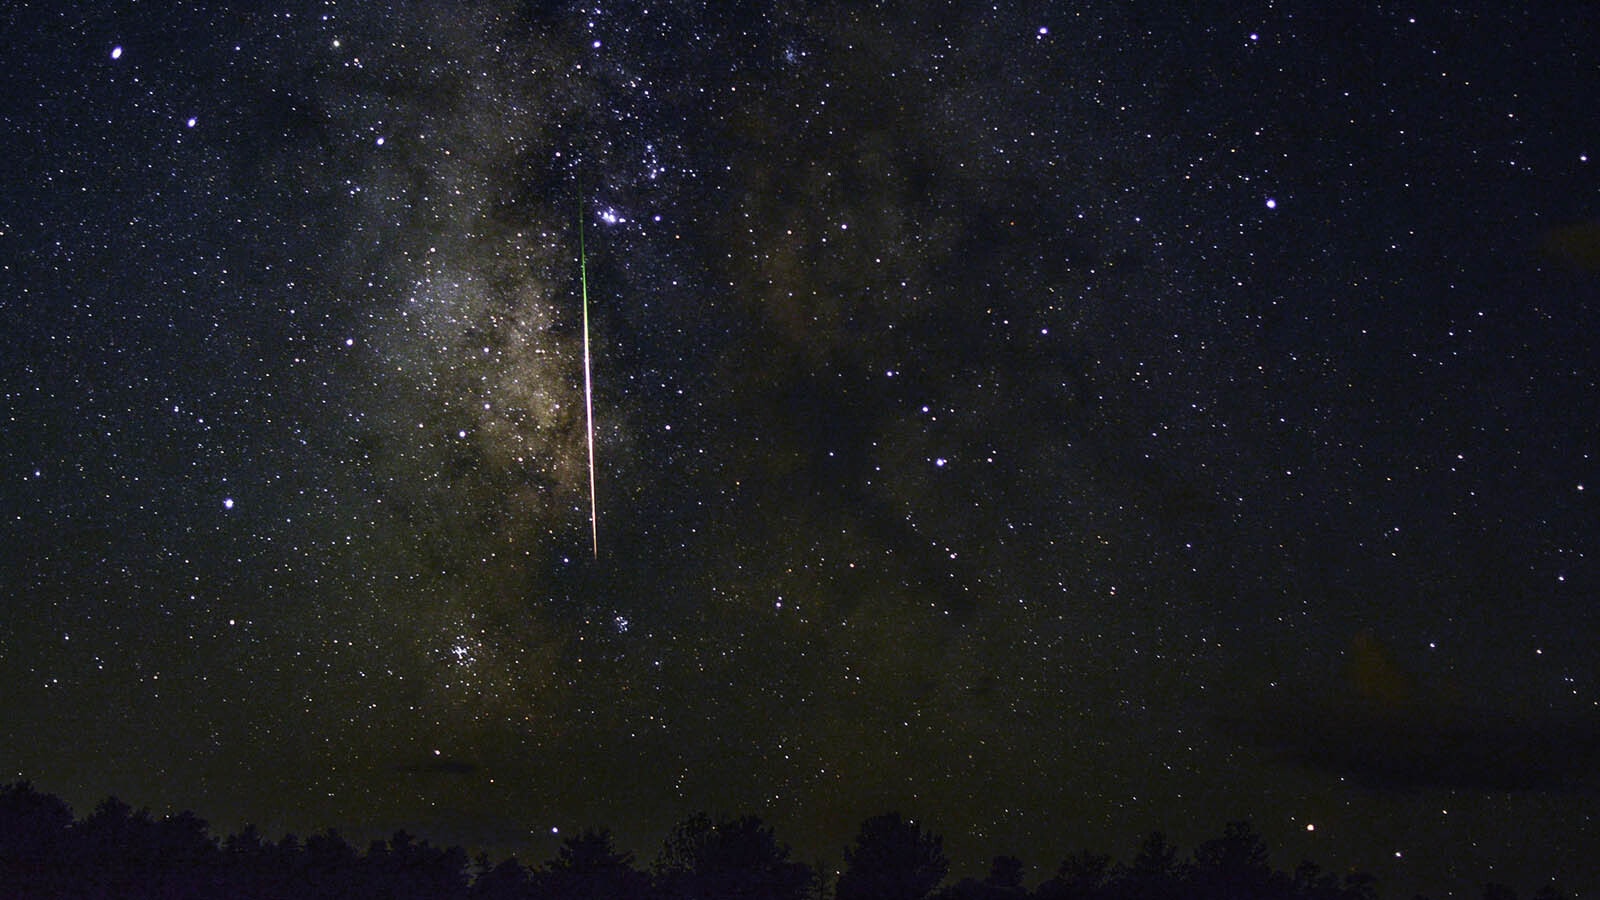 A bright Perseid meteor with the Milky Way in the background.